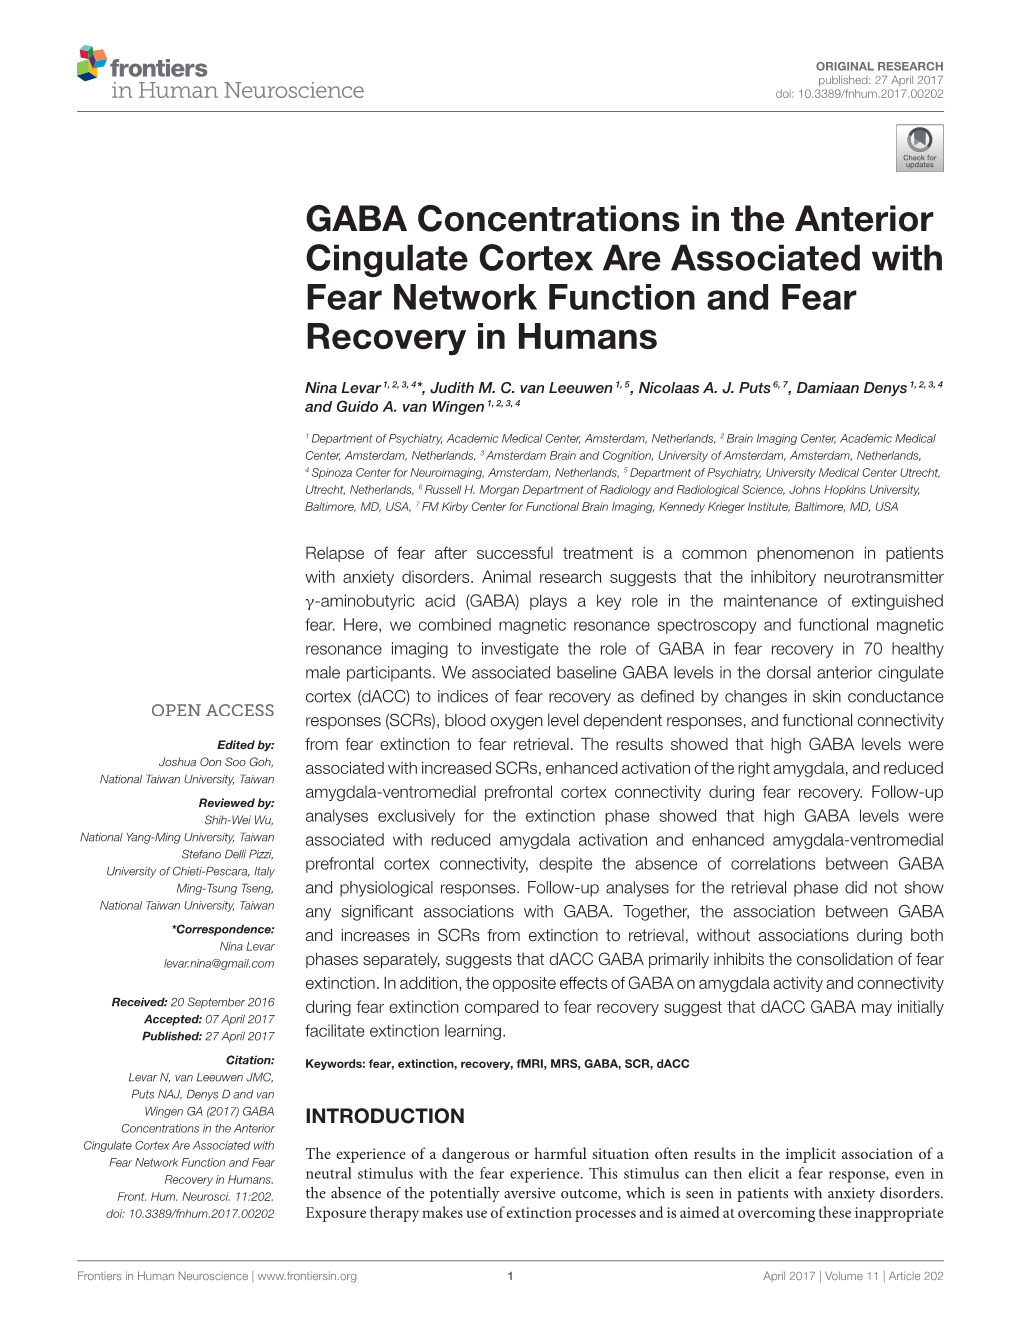 GABA Concentrations in the Anterior Cingulate Cortex Are Associated with Fear Network Function and Fear Recovery in Humans